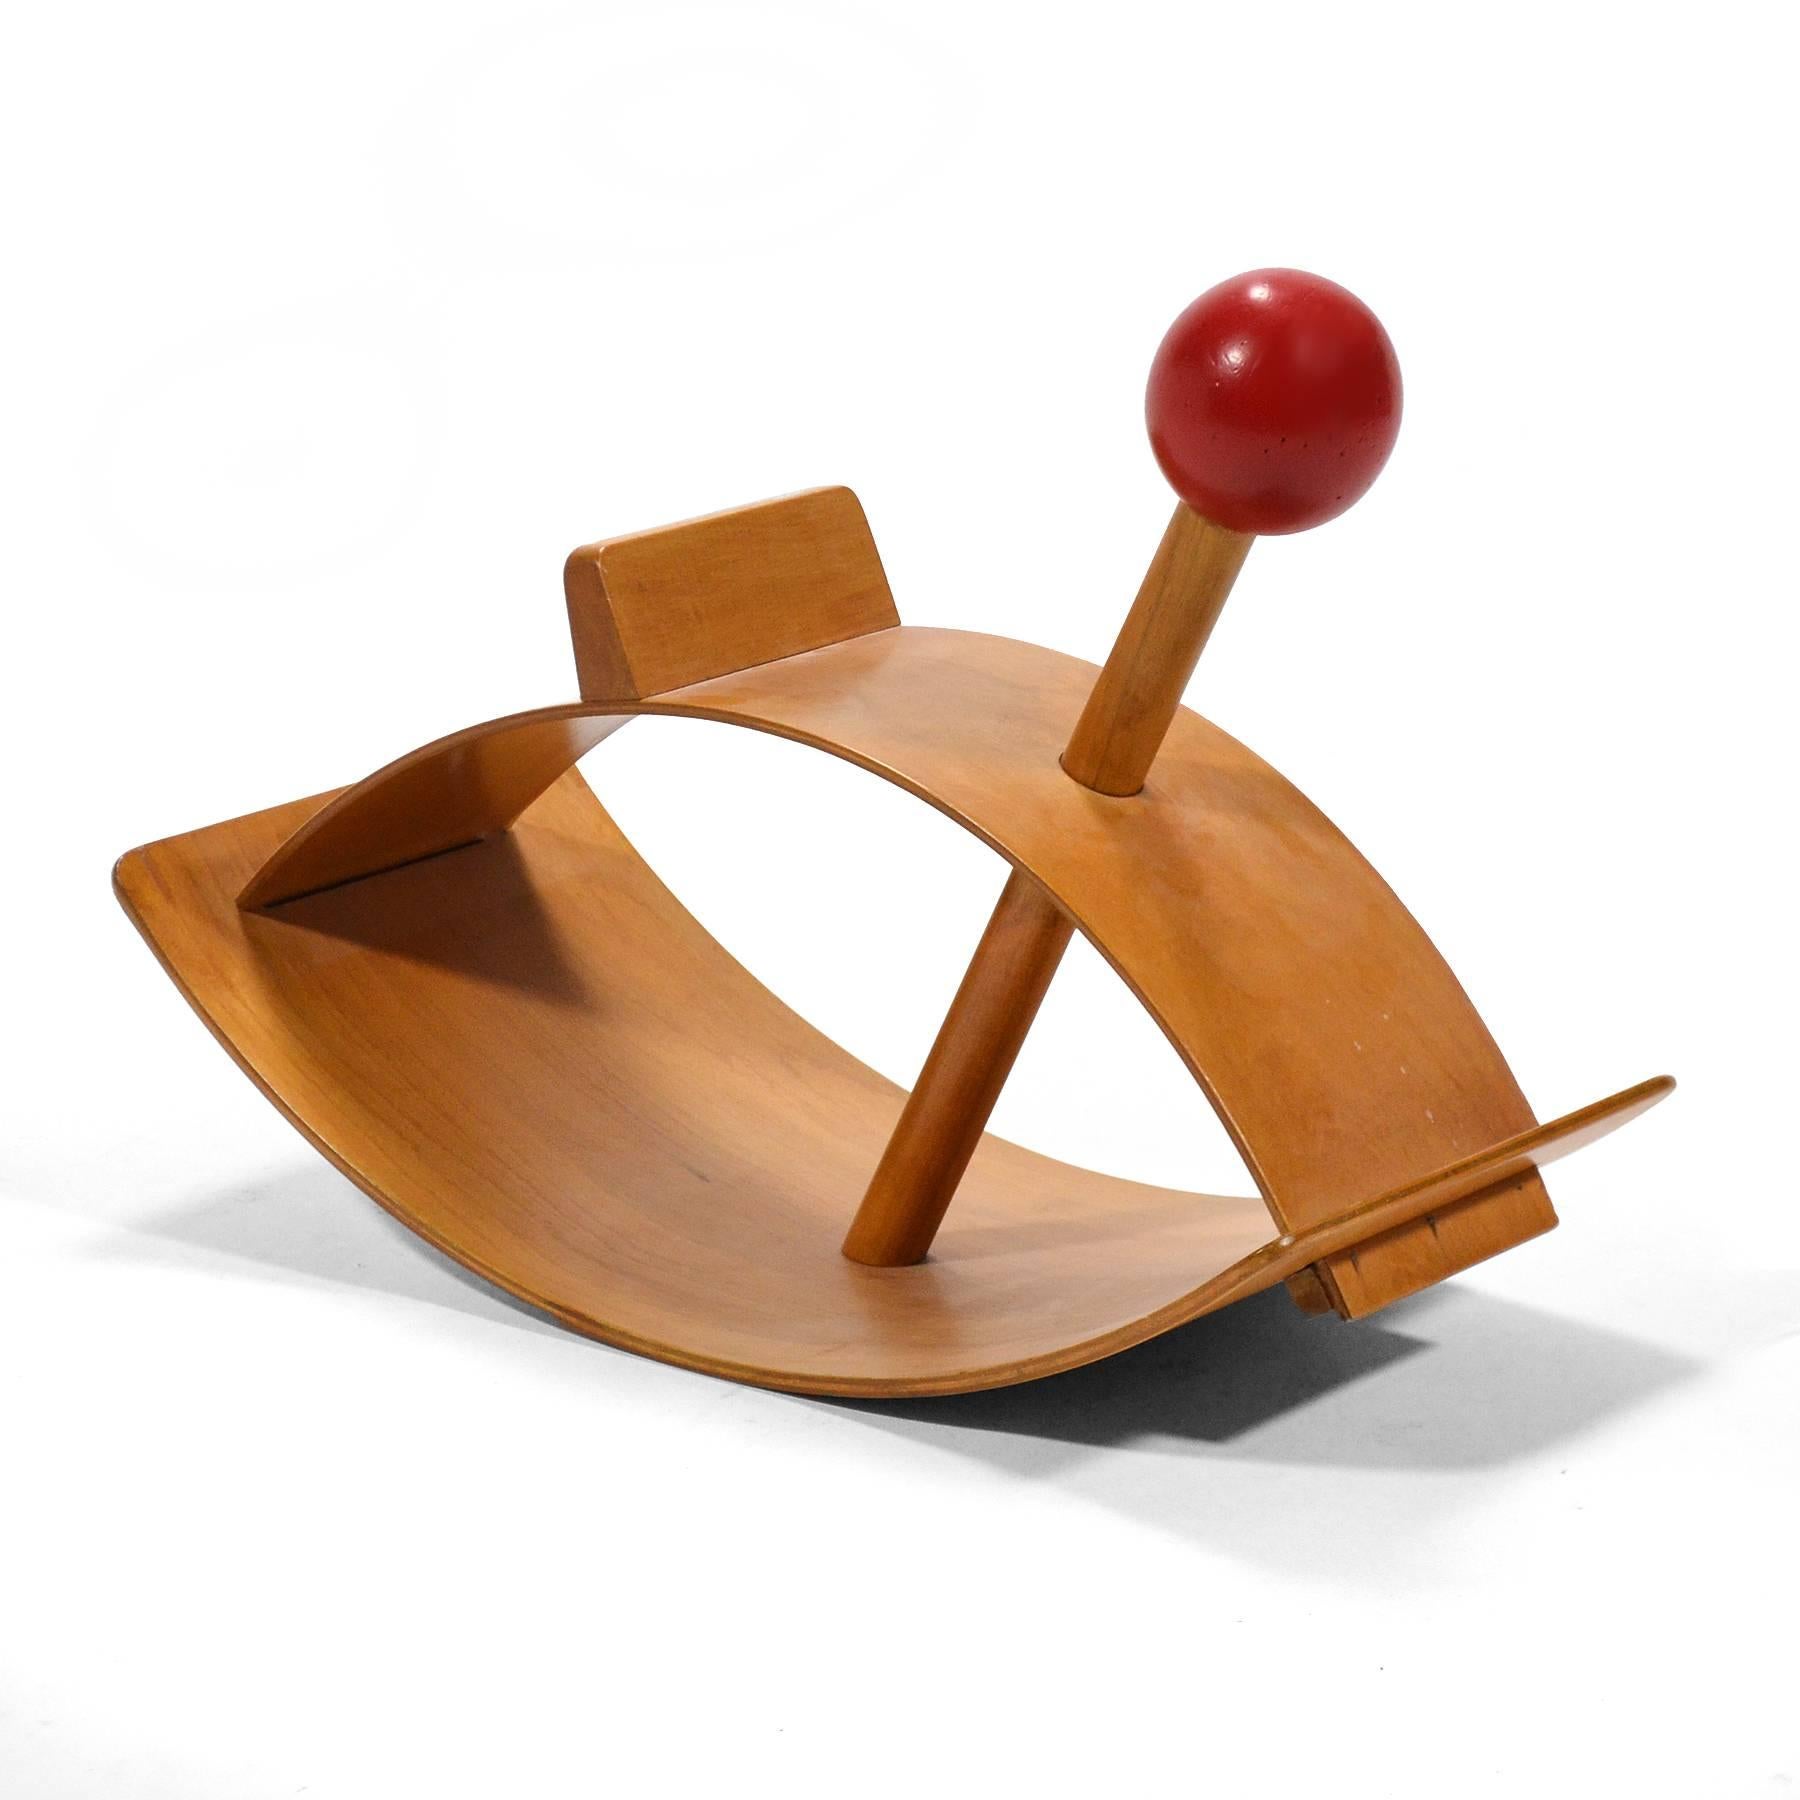 Designed in 1964 by Gloria Caranica for Creative Playthings, the 